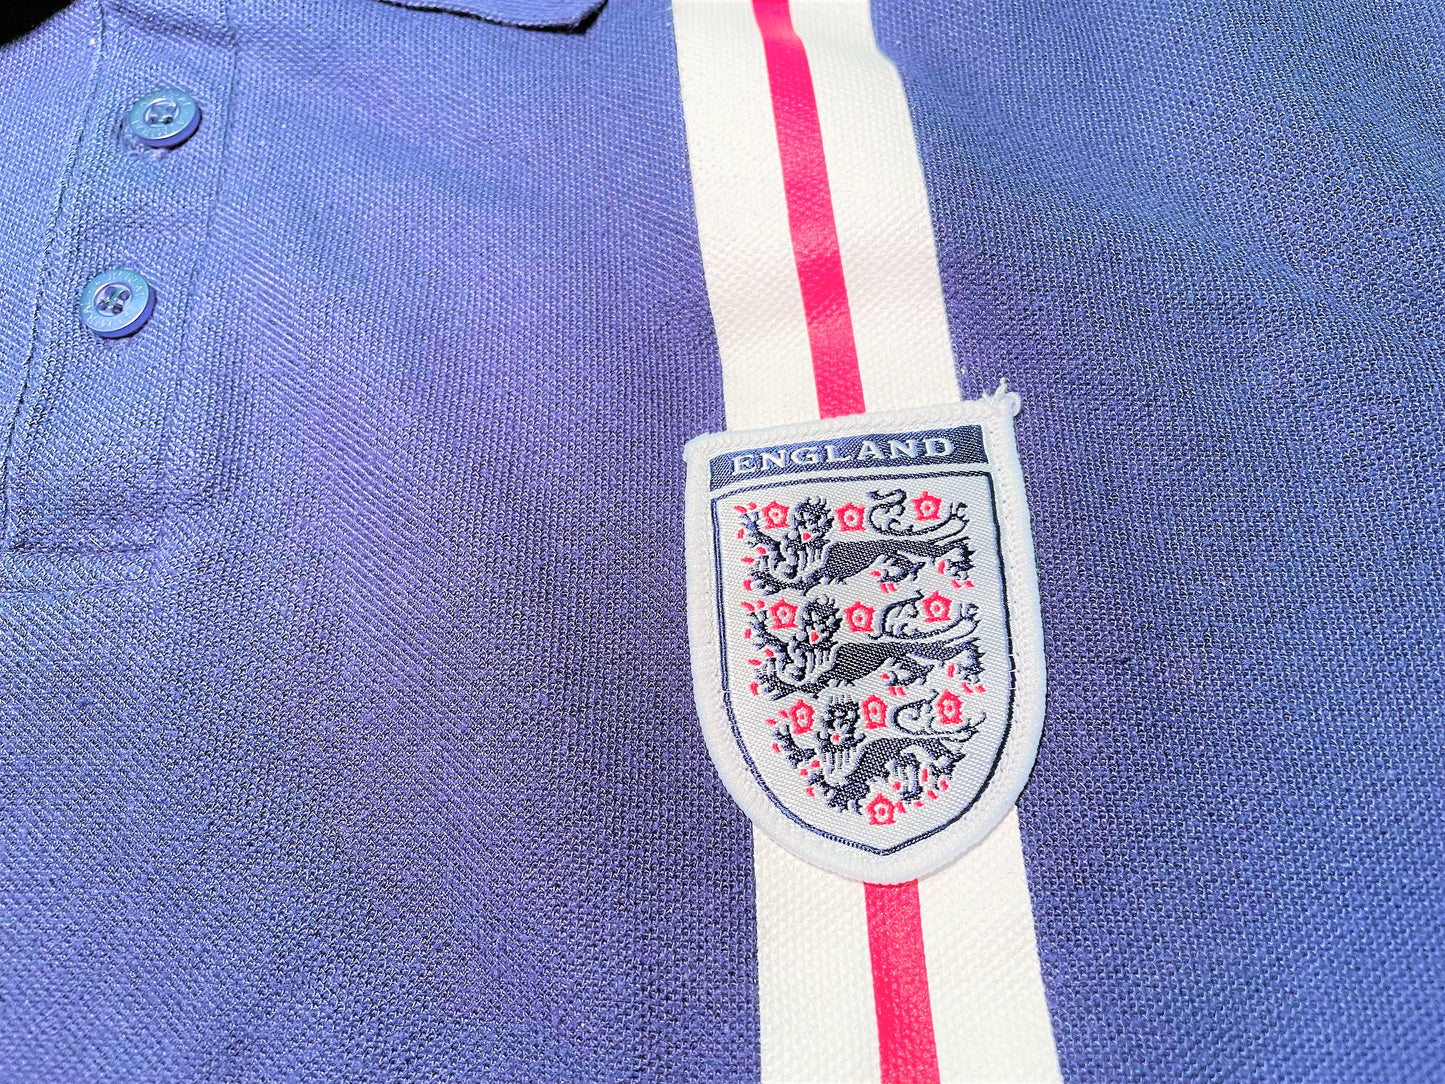 England Football Fan Shirt (very good) Adults XL. Height 25 inches